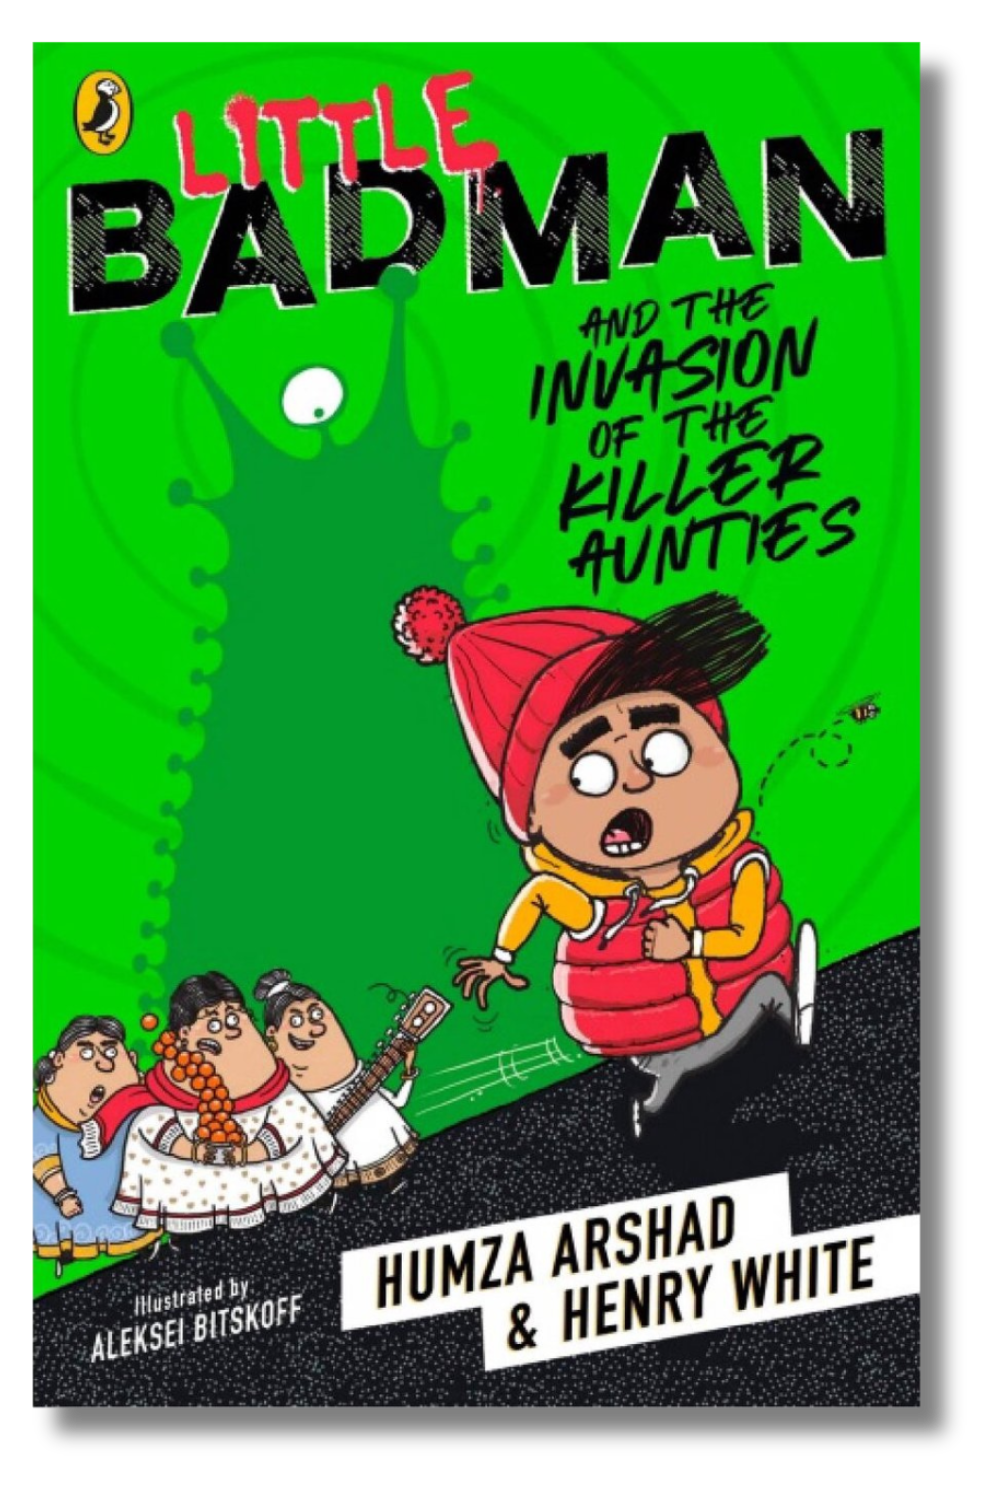 The cover of "Little Badman and the Invasion of the Killer Aunties" by Humza Arshad and Henry White